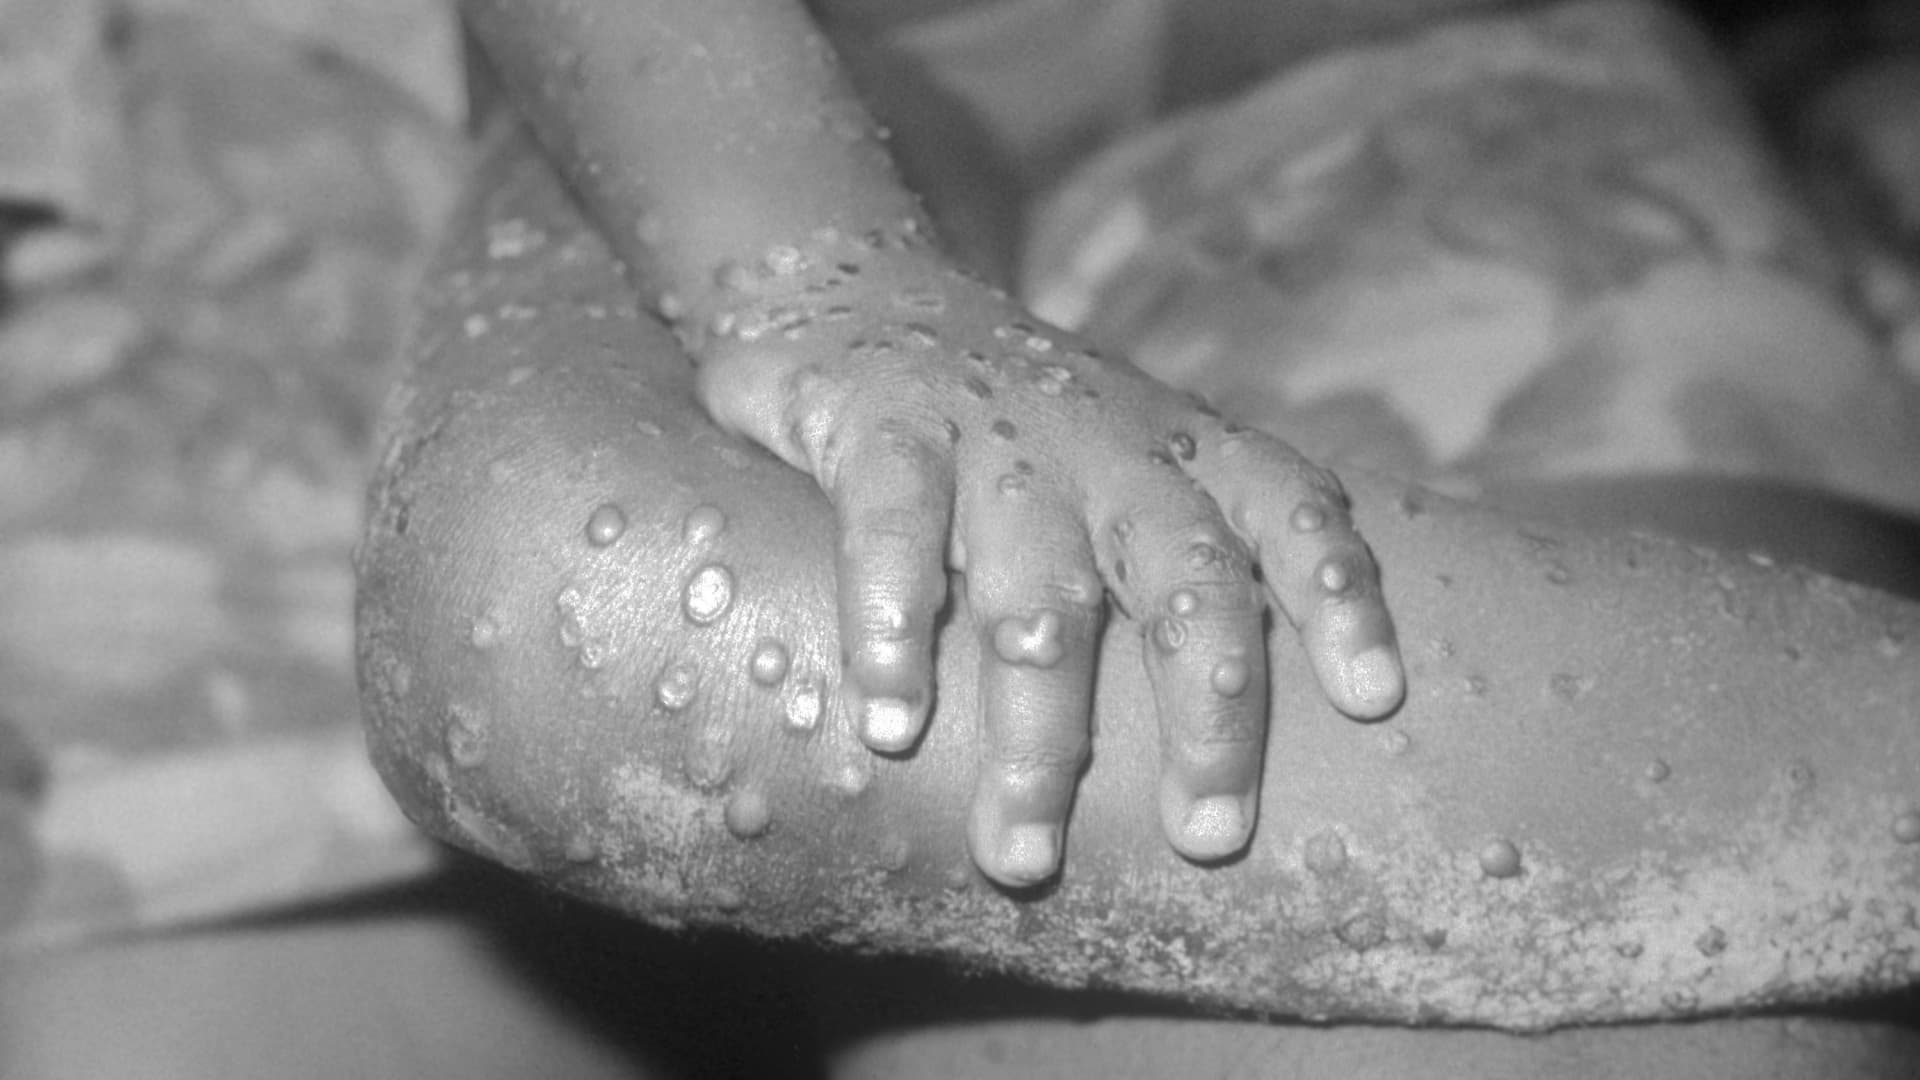 First country introduces mandatory monkeypox quarantine as global cases rise